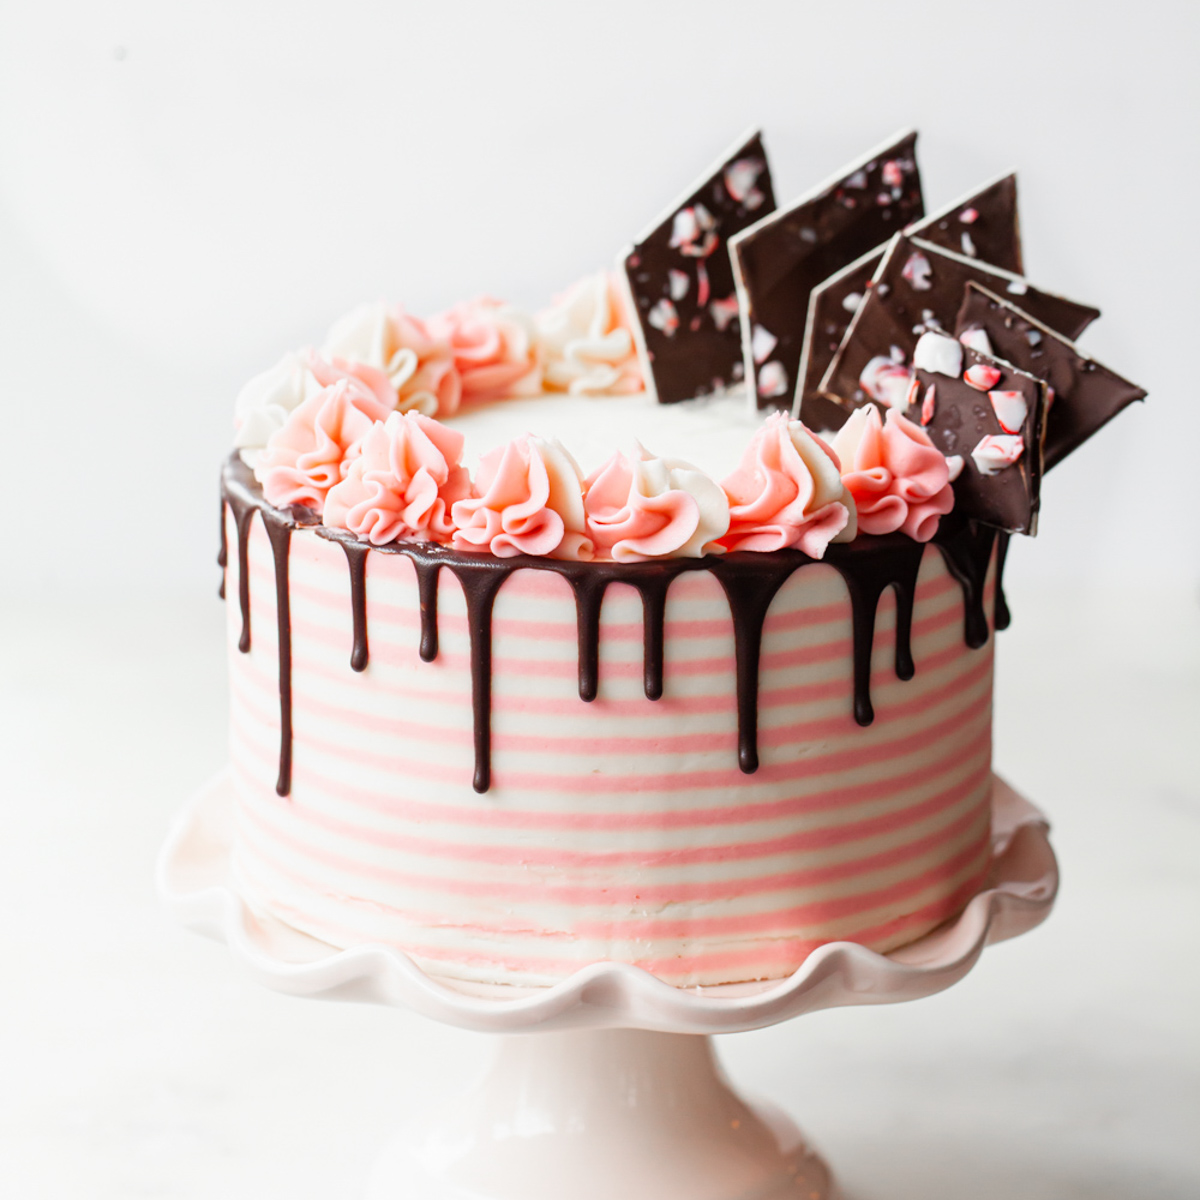 Happy Birthday Cake Cotton Candy Mix | Cotton Cravings